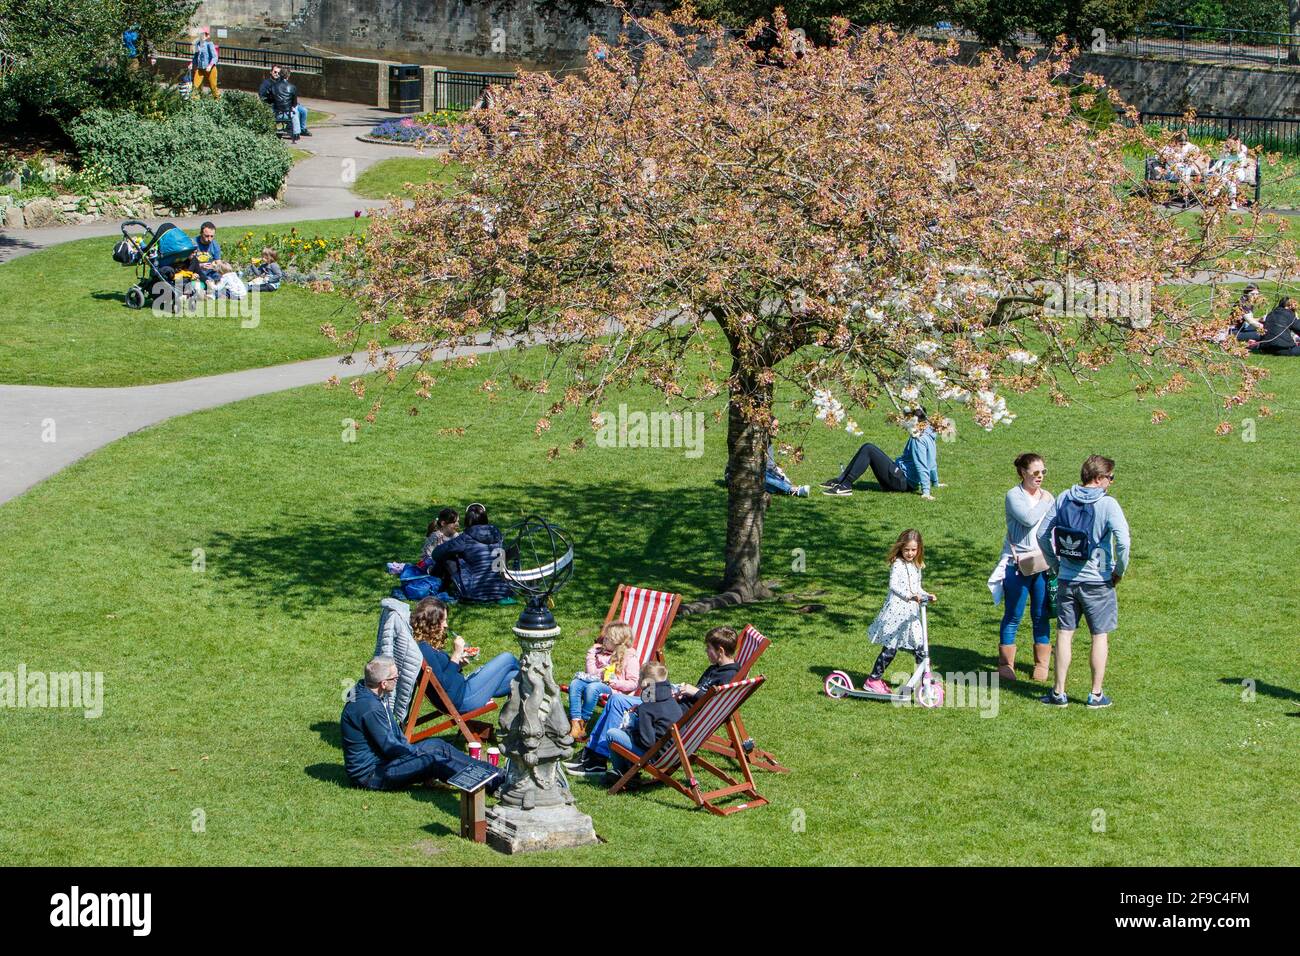 Bath, Somerset, UK. 17th April, 2021. On the first Saturday after the Covid stay at home lockdown restrictions were lifted in England, people are pictured enjoying the sunshine in Parade Gardens. Credit: Lynchpics/Alamy Live News Stock Photo